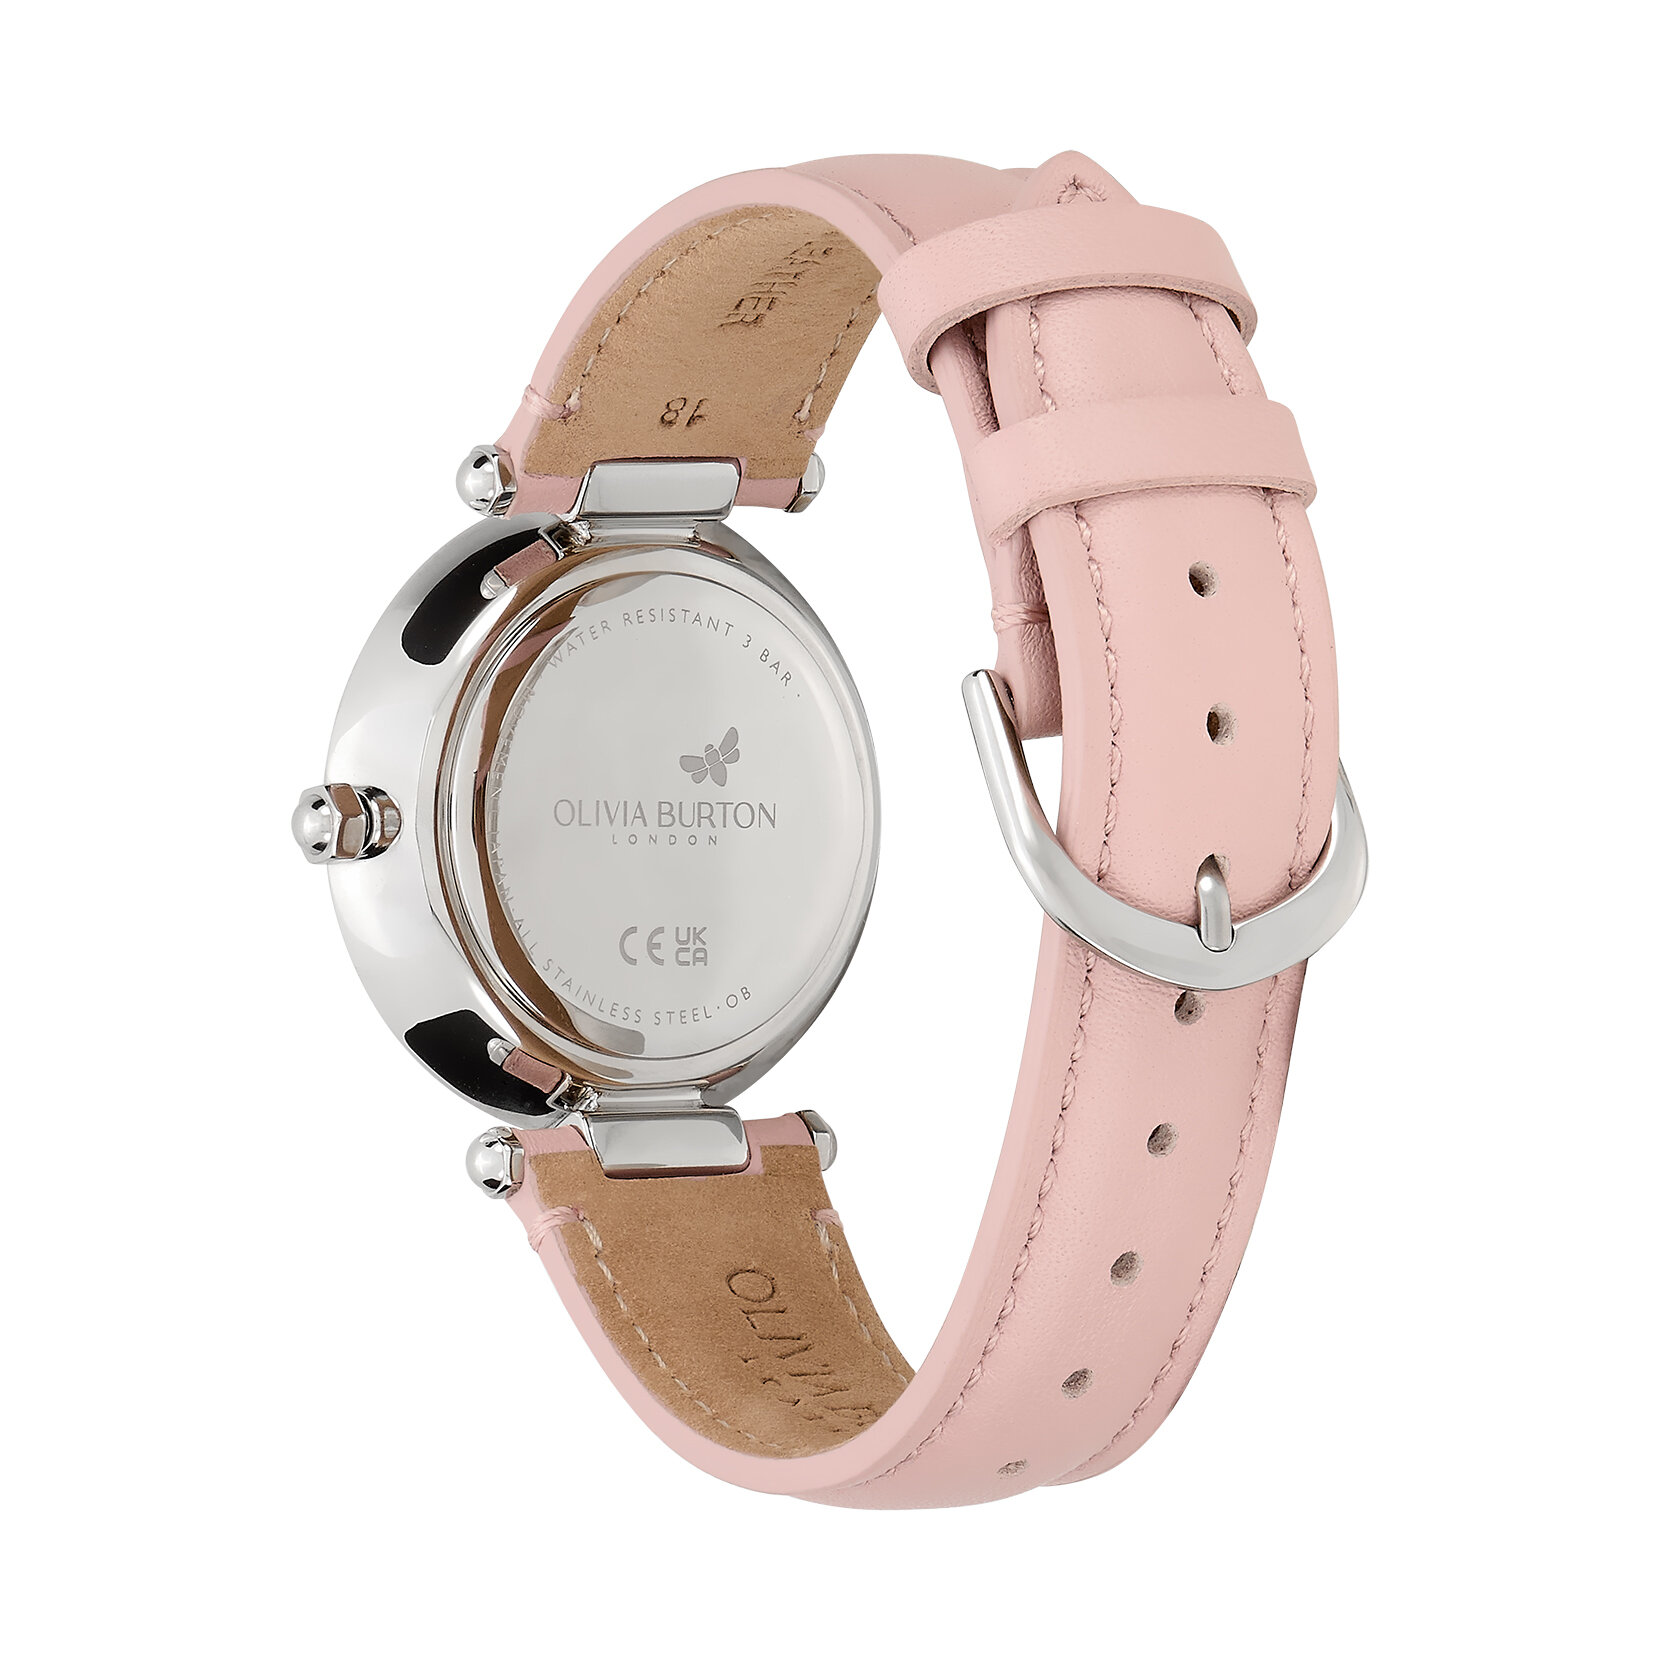 34mm Floral T-Bar Silver & Rose Leather Strap Watch